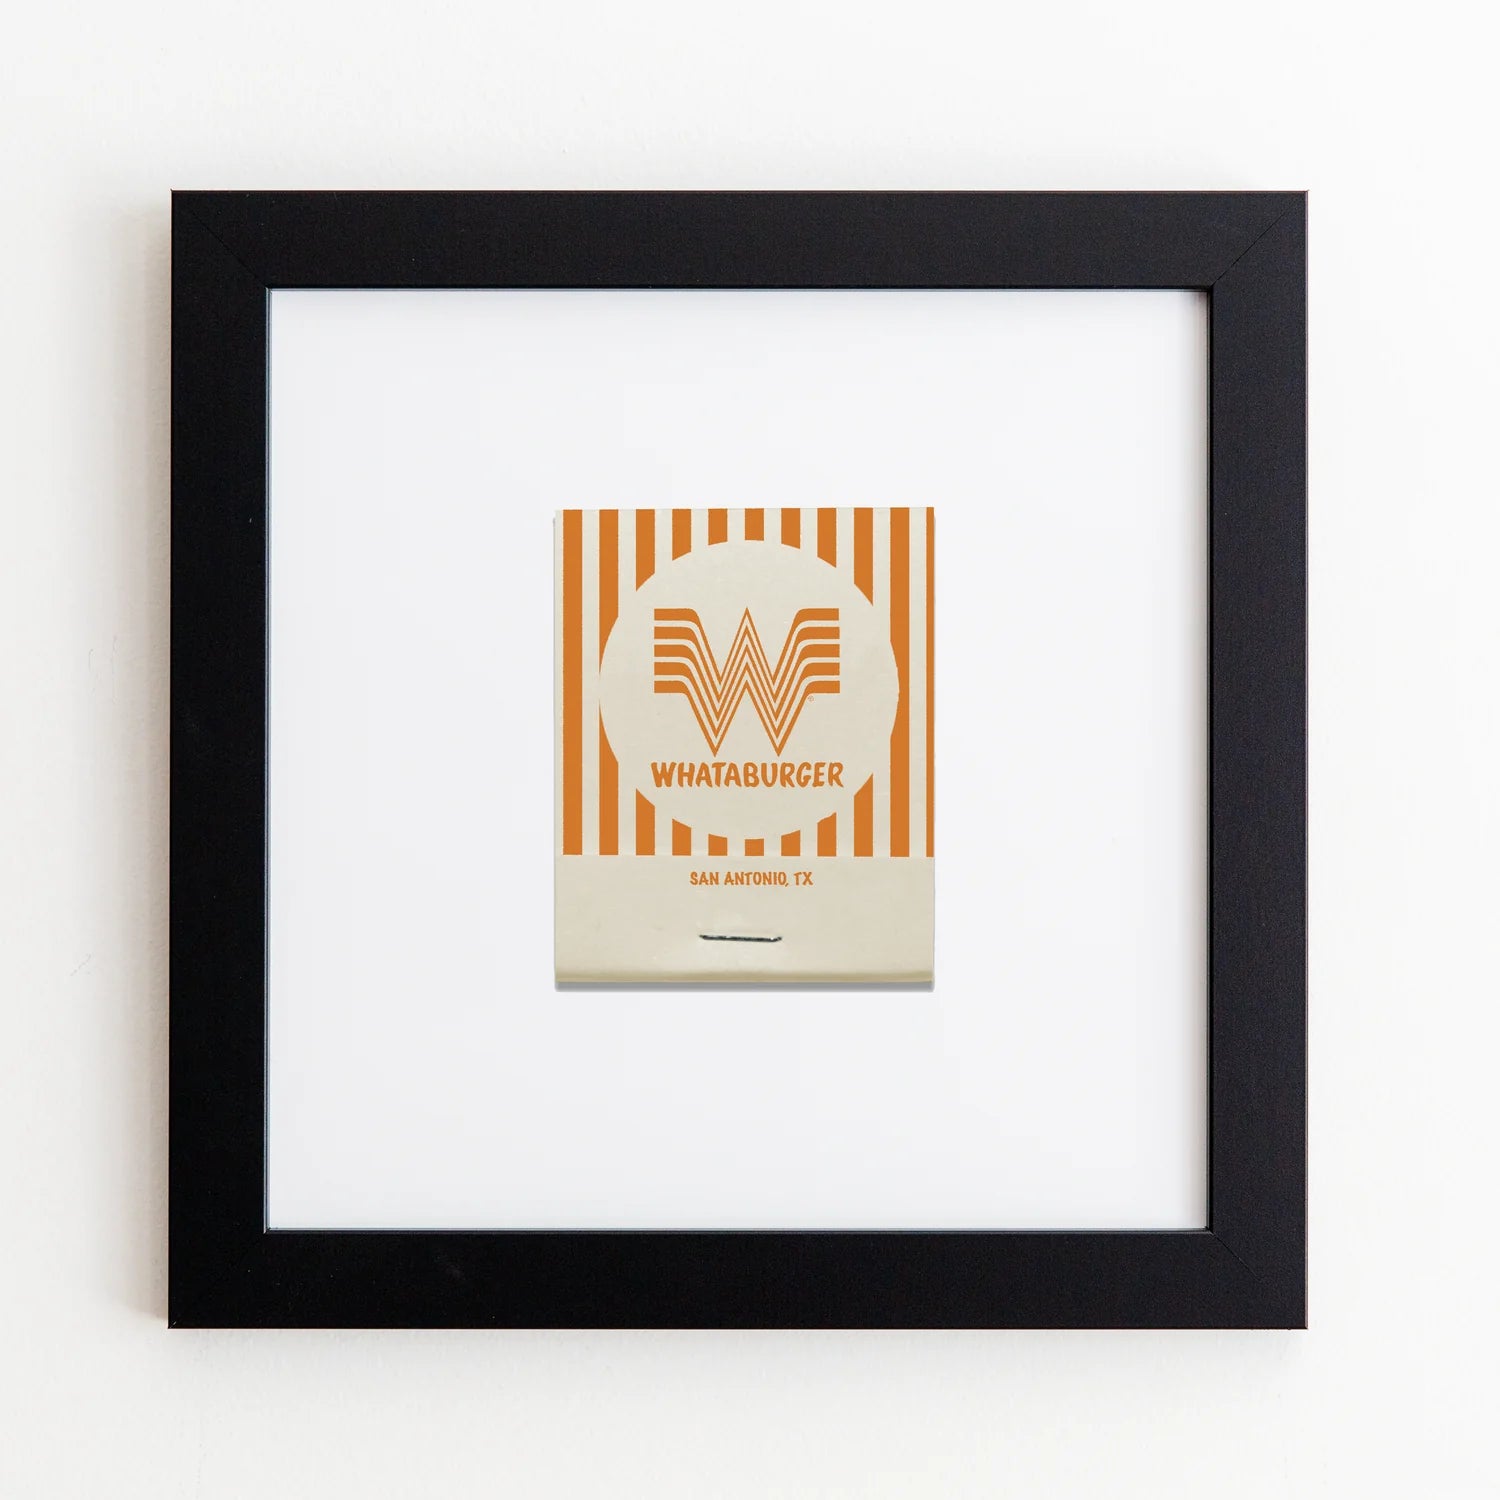 A framed Art Square Black Frame of Whataburger&#39;s logo with orange and white stripes and a stylized &quot;W&quot; in the center, titled &quot;San Antonio, TX,&quot; displayed on a white wall by Match South.